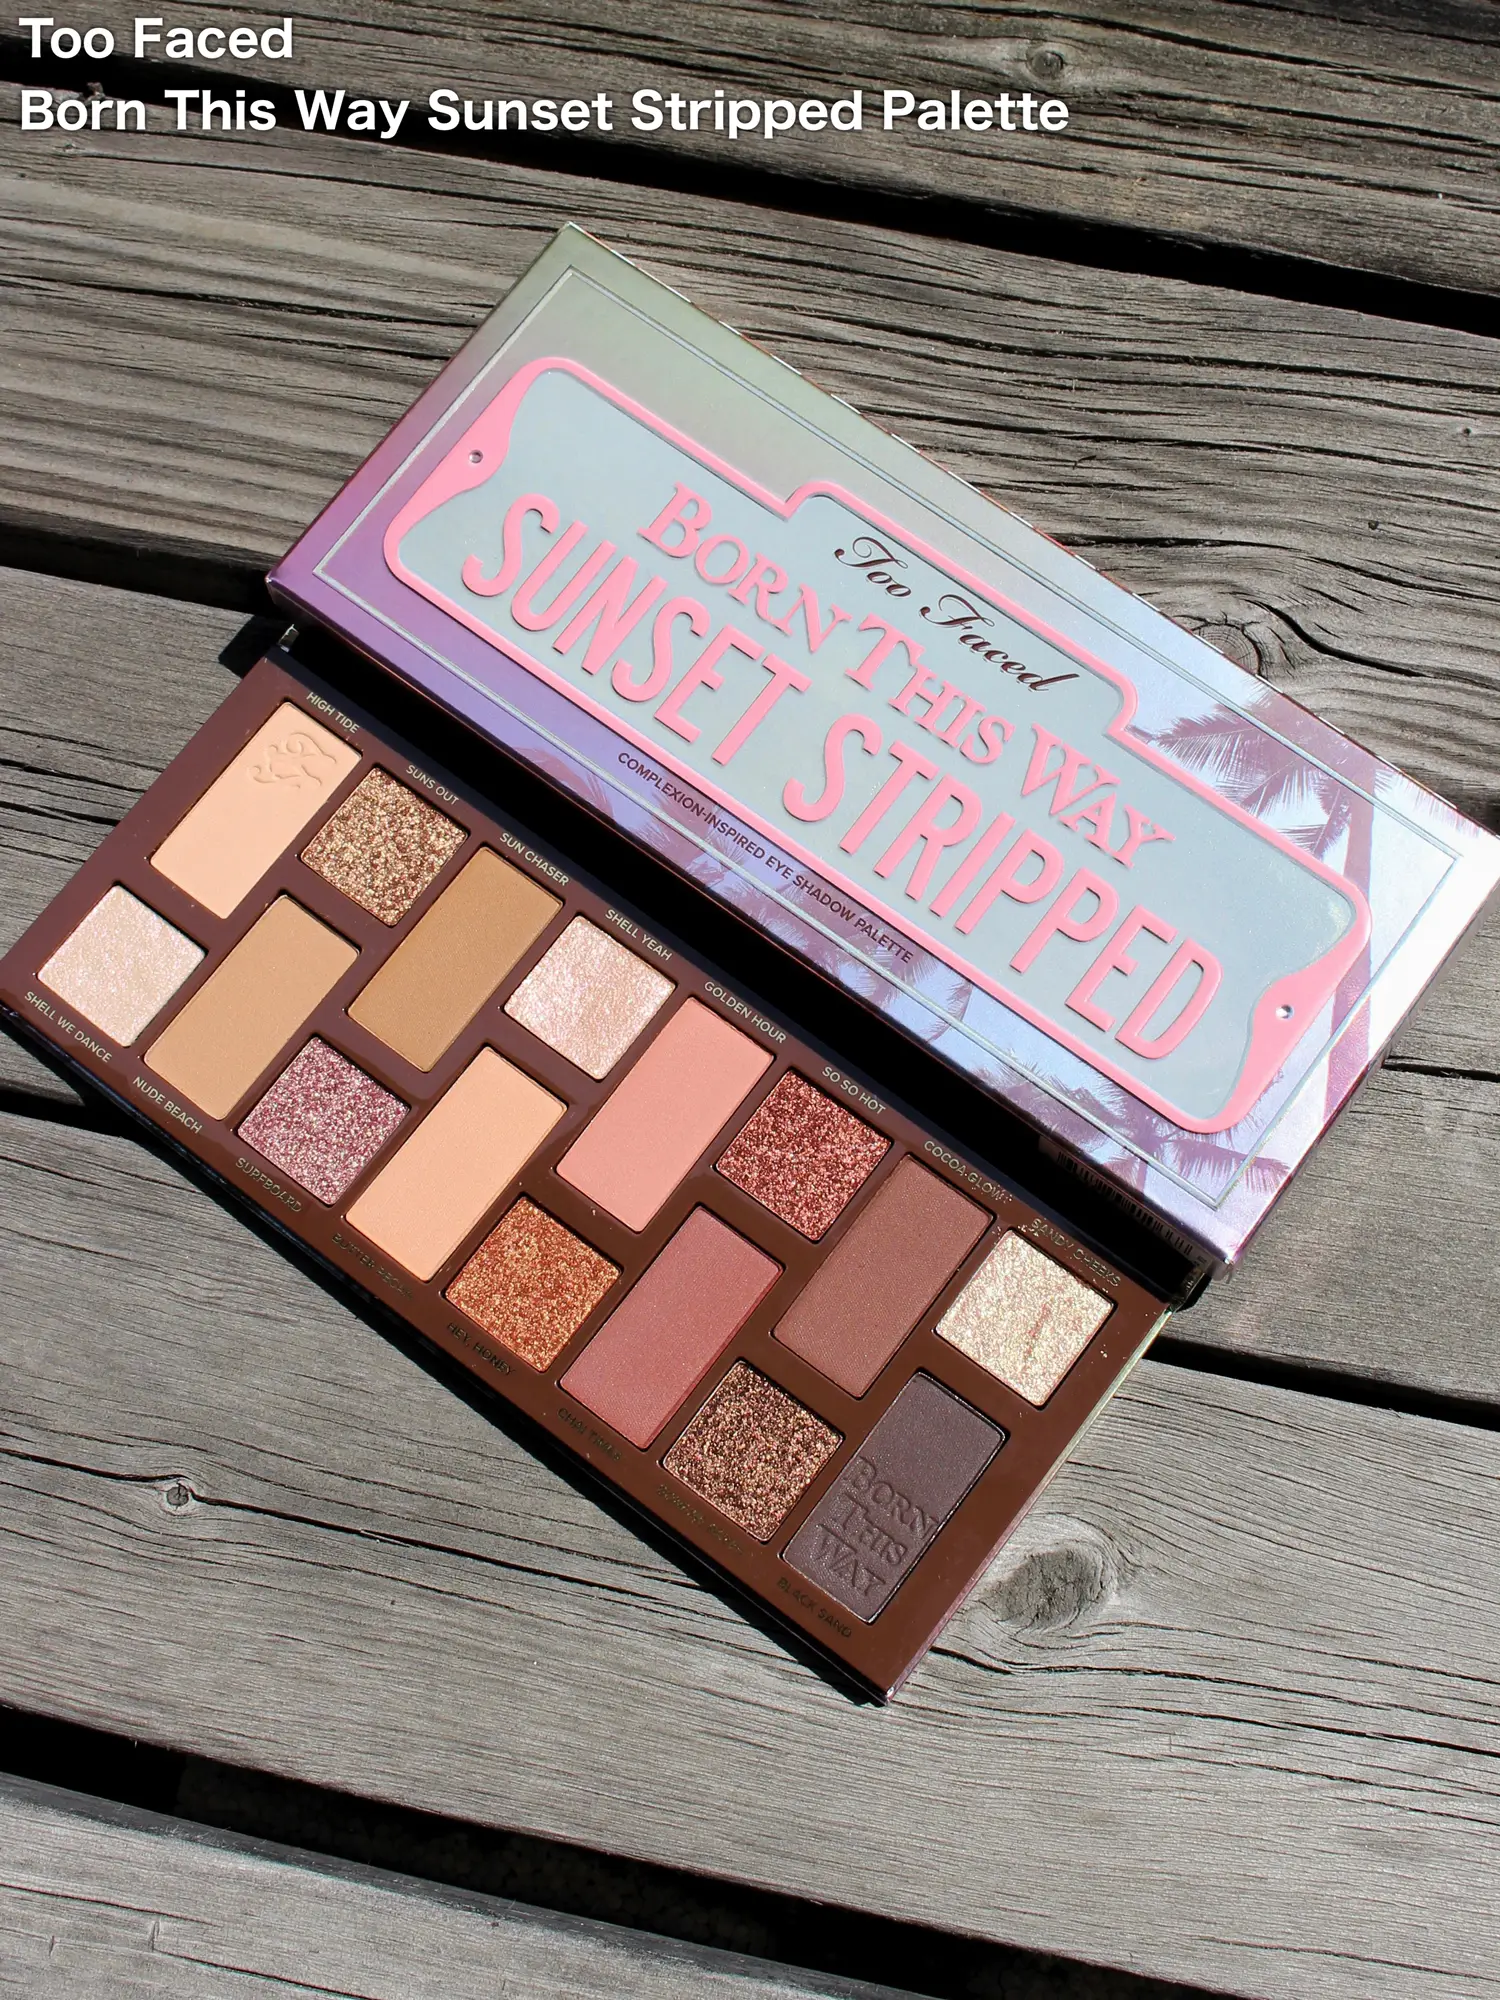 Born This Way Sunset Stripped Eyeshadow Palette - Too Faced